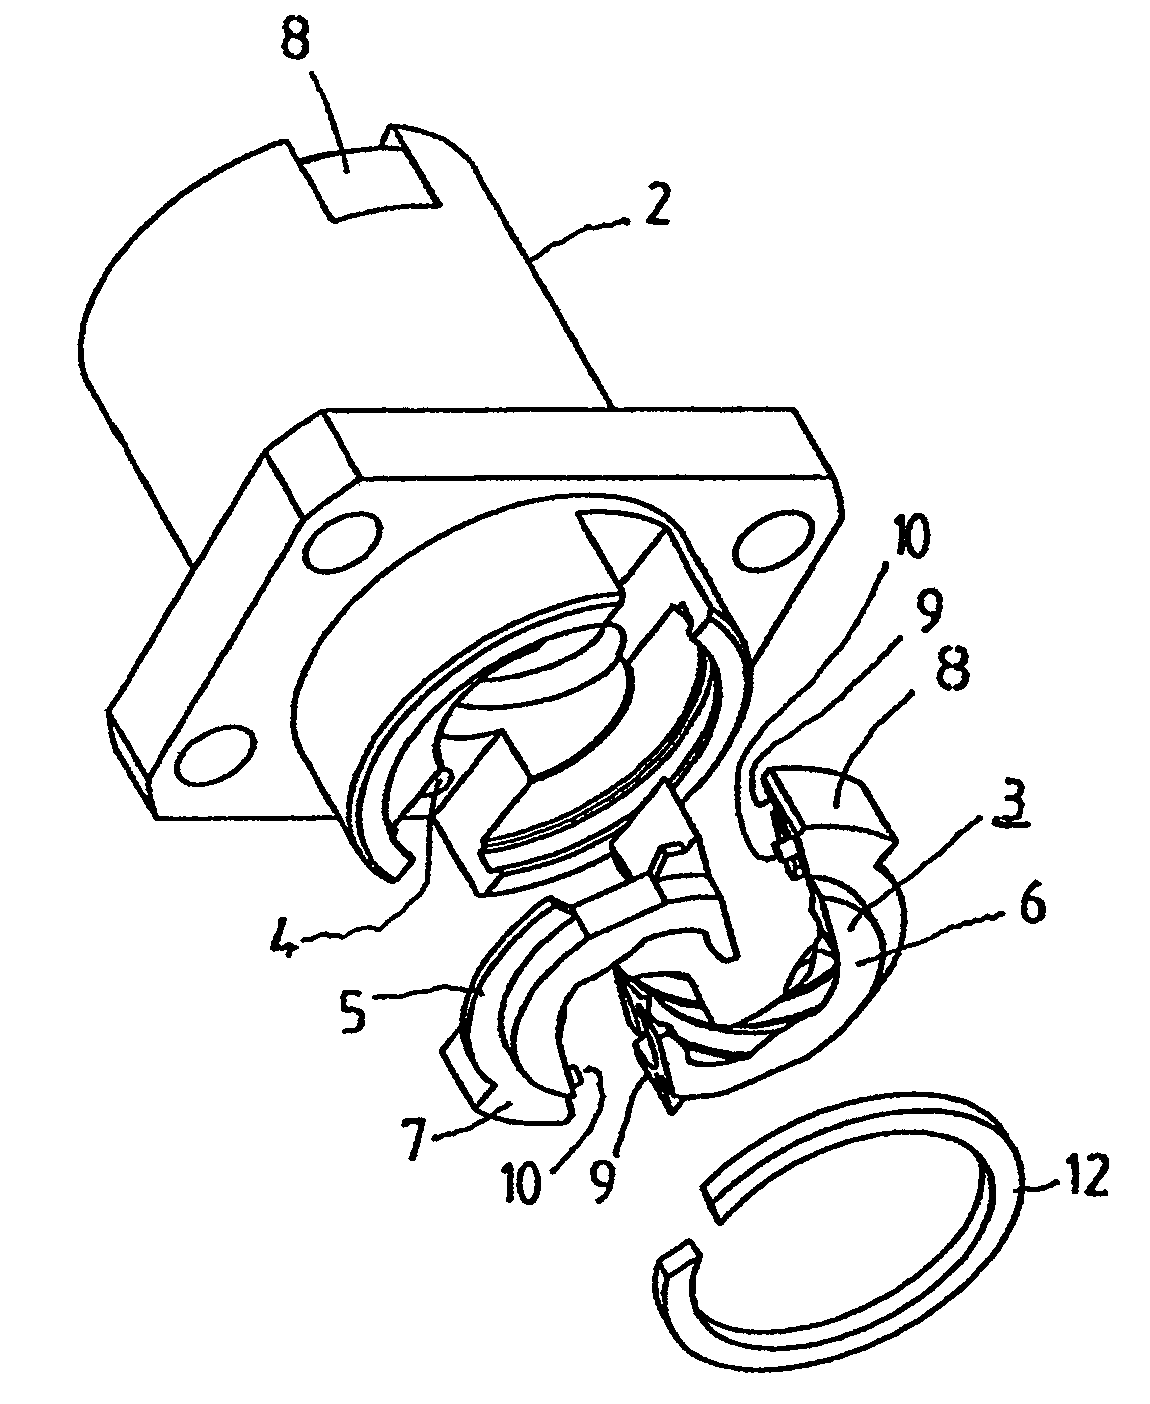 Recirculating ball screw and nut drive